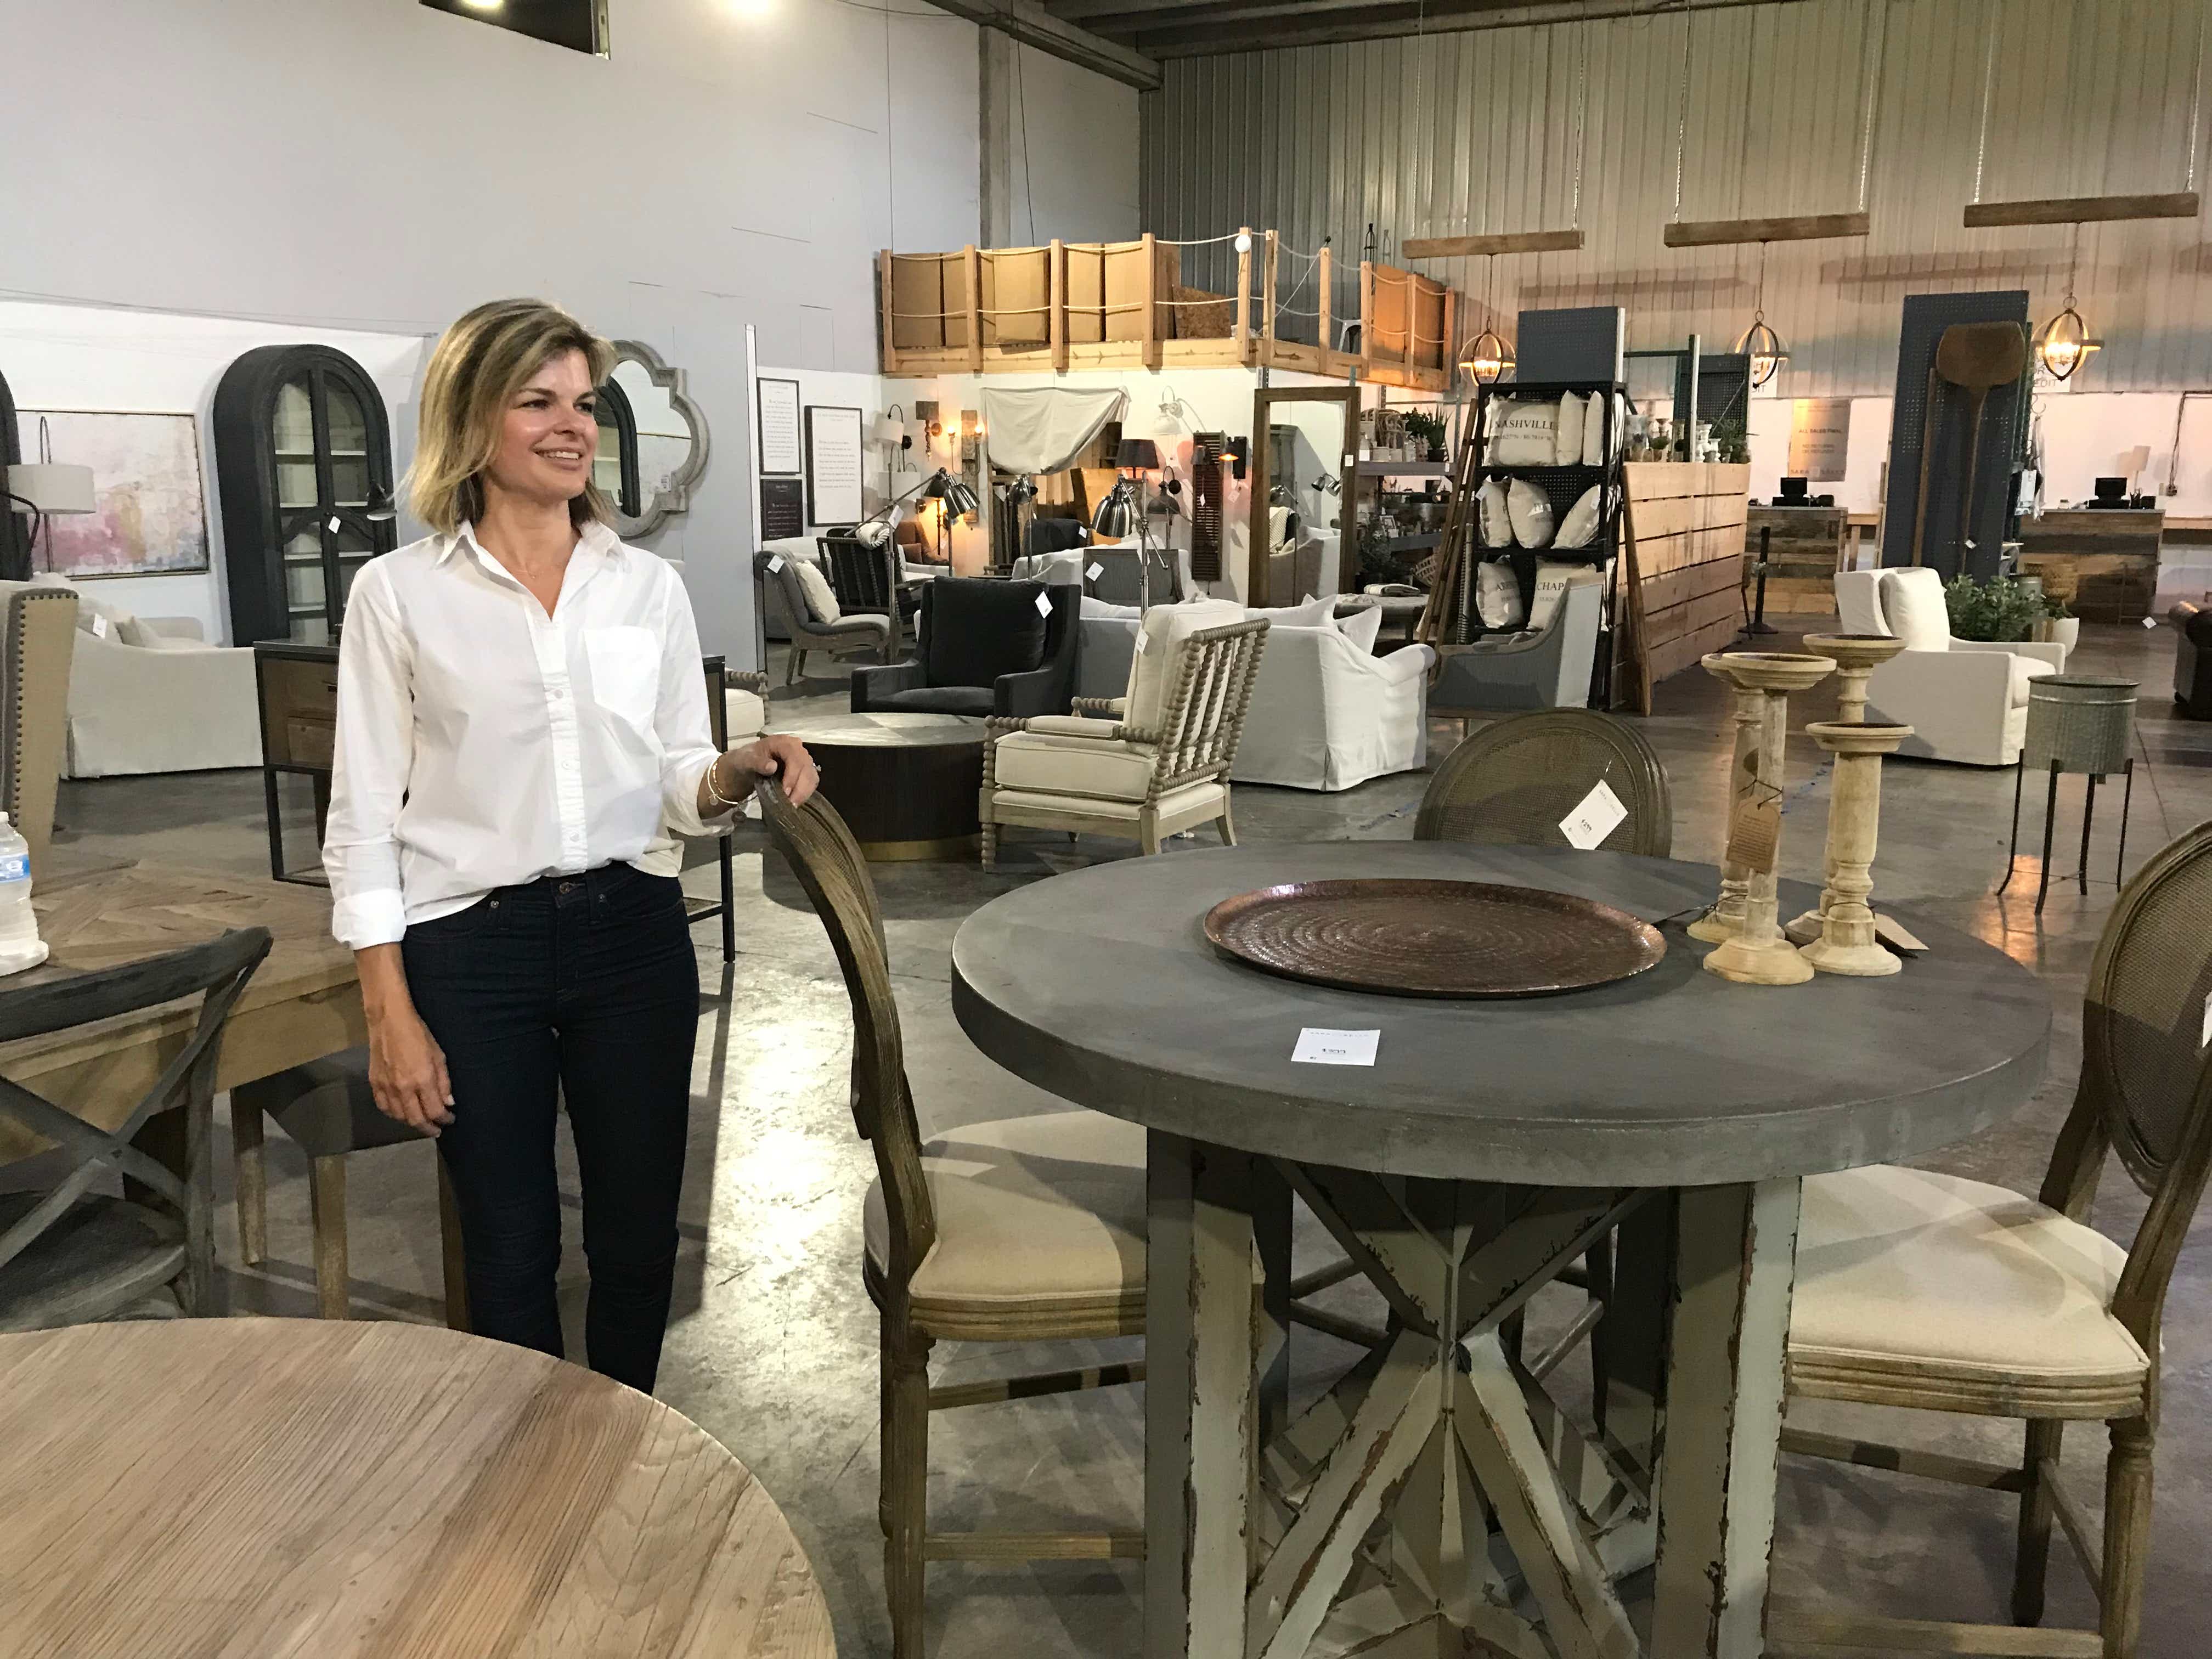 Furniture Stores Discounts On Home Decor At Sara Sells Warehouse